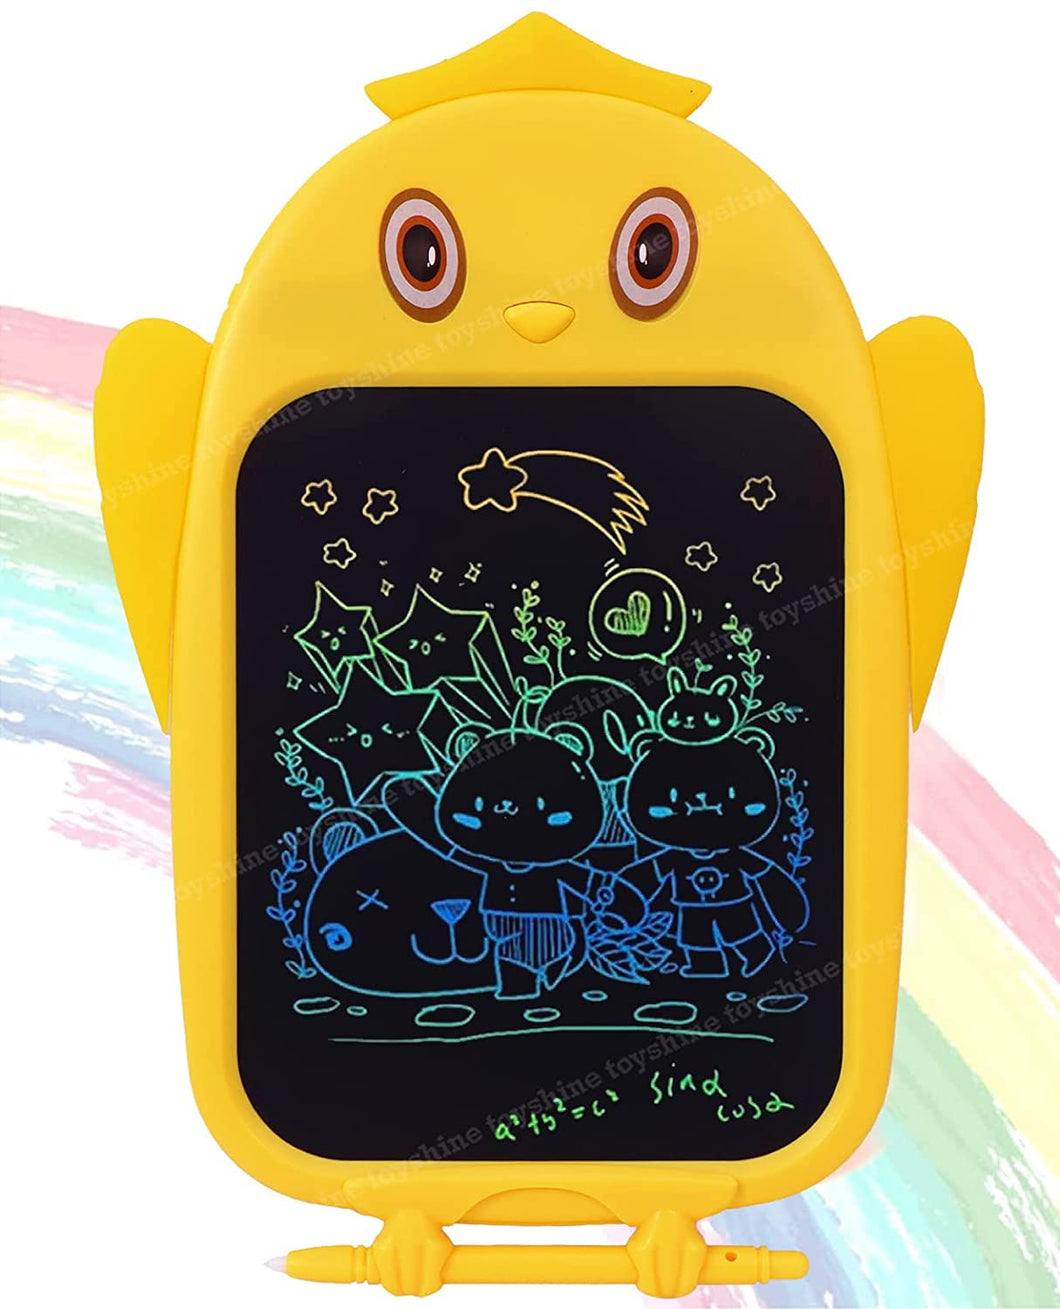 Toyshine Writing Tablet 8.5 Inch Colorful Screen Doodle Board for Ages 3+ Kids Toys, Electronic Drawing Board Kids Doodle Pad Educational and Learning Toys Girls Boys Gifts Yellow M3